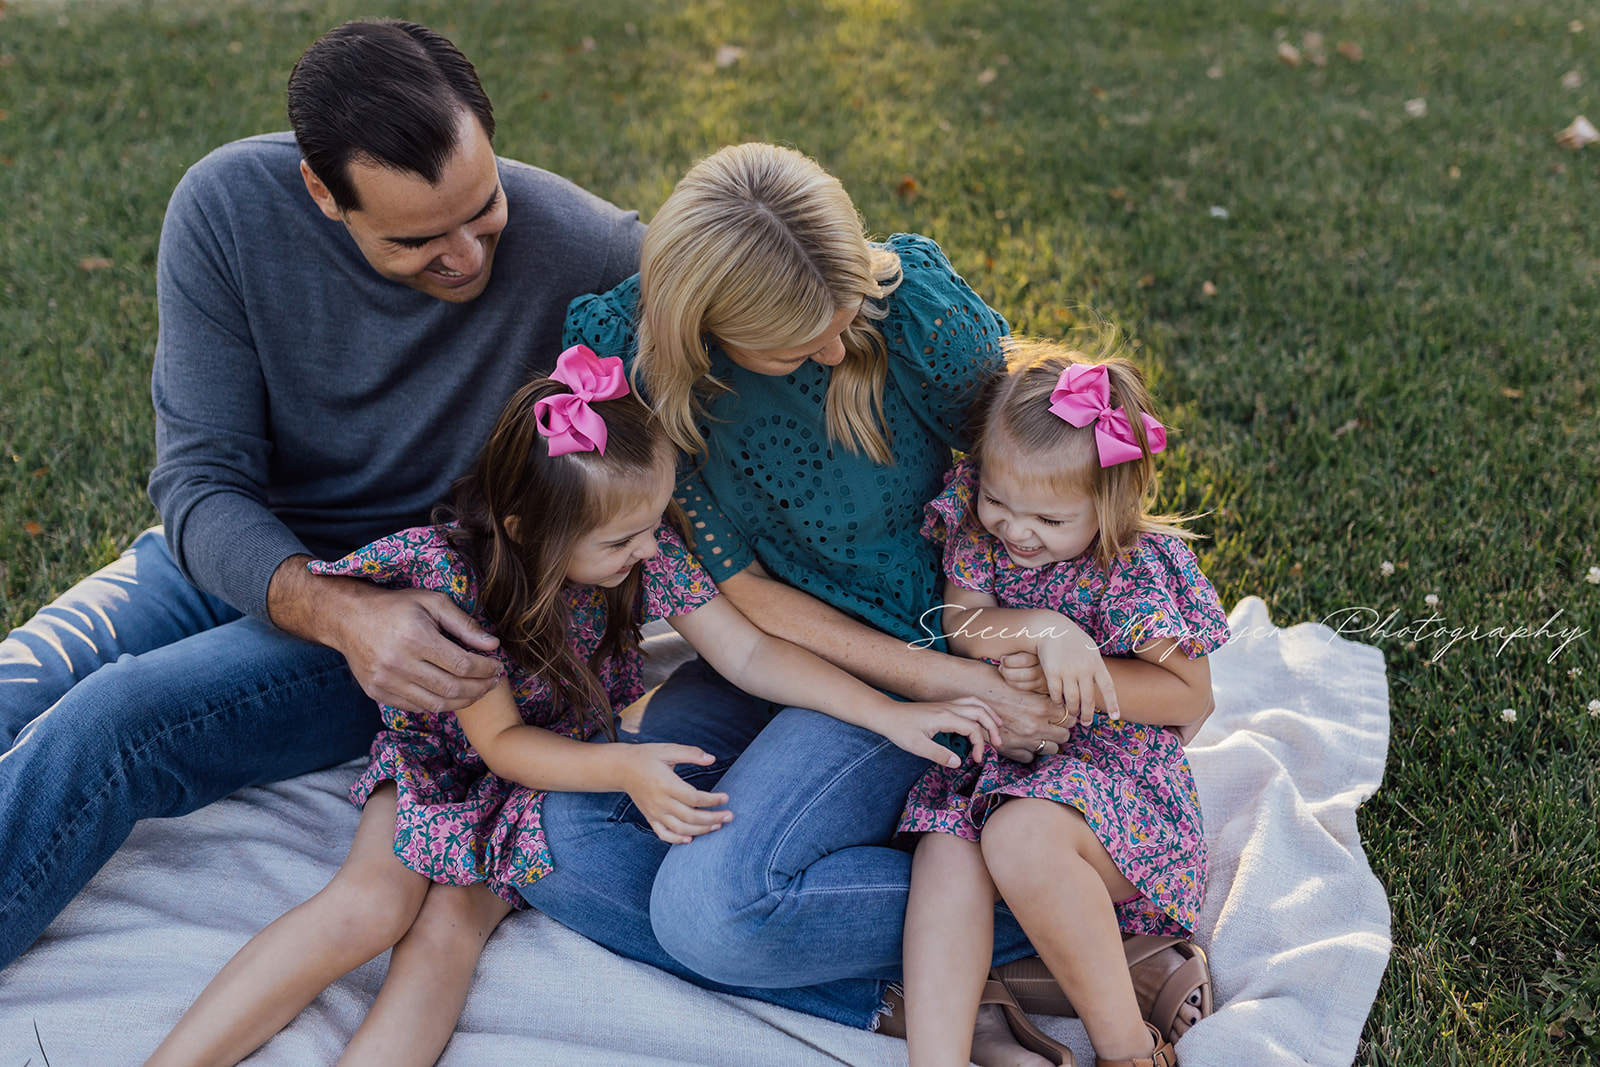 Outdoor family session at sunset in a field of wildflowers in Naperville, IL